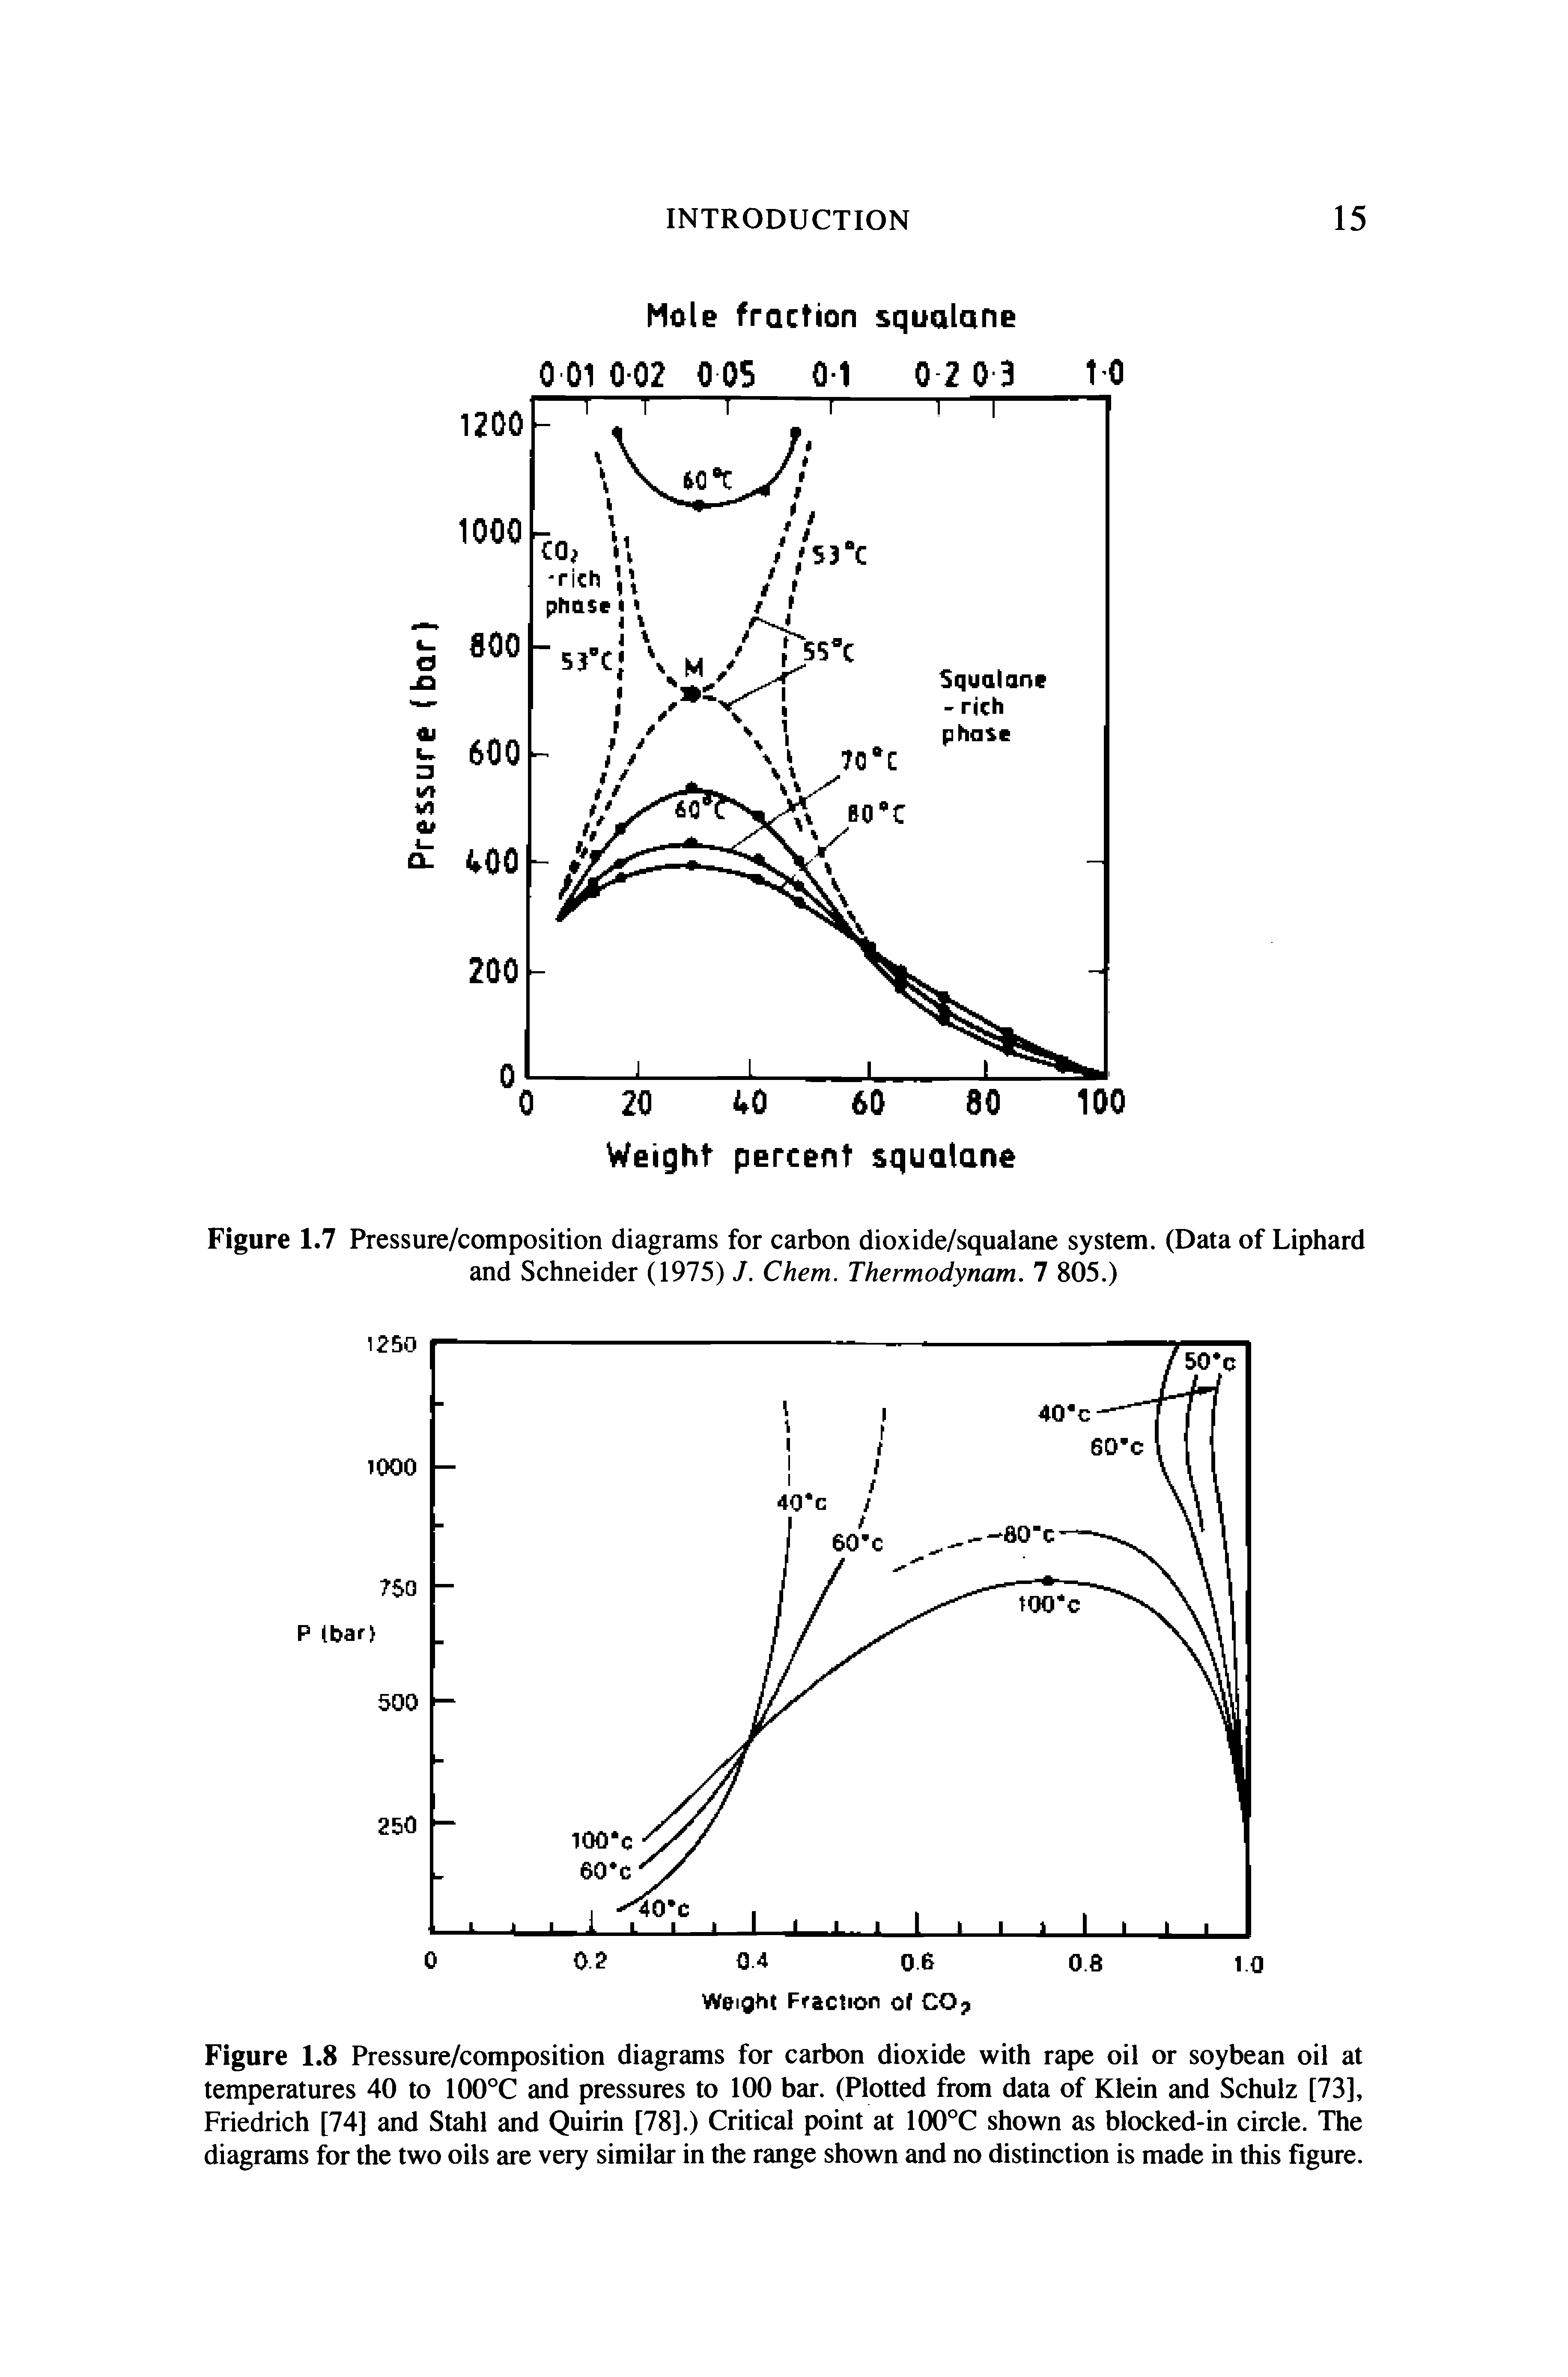 Figure 1.8 Pressure/composition diagrams for carbon dioxide with rape oil or soybean oil at temperatures 40 to 100°C and pressures to 100 bar. (Plotted from data of Klein and Schulz [73], Friedrich [74] and Stahl and Quirin [78].) Critical point at 100°C shown as blocked-in circle. The diagrams for the two oils are very similar in the range shown and no distinction is made in this figure.